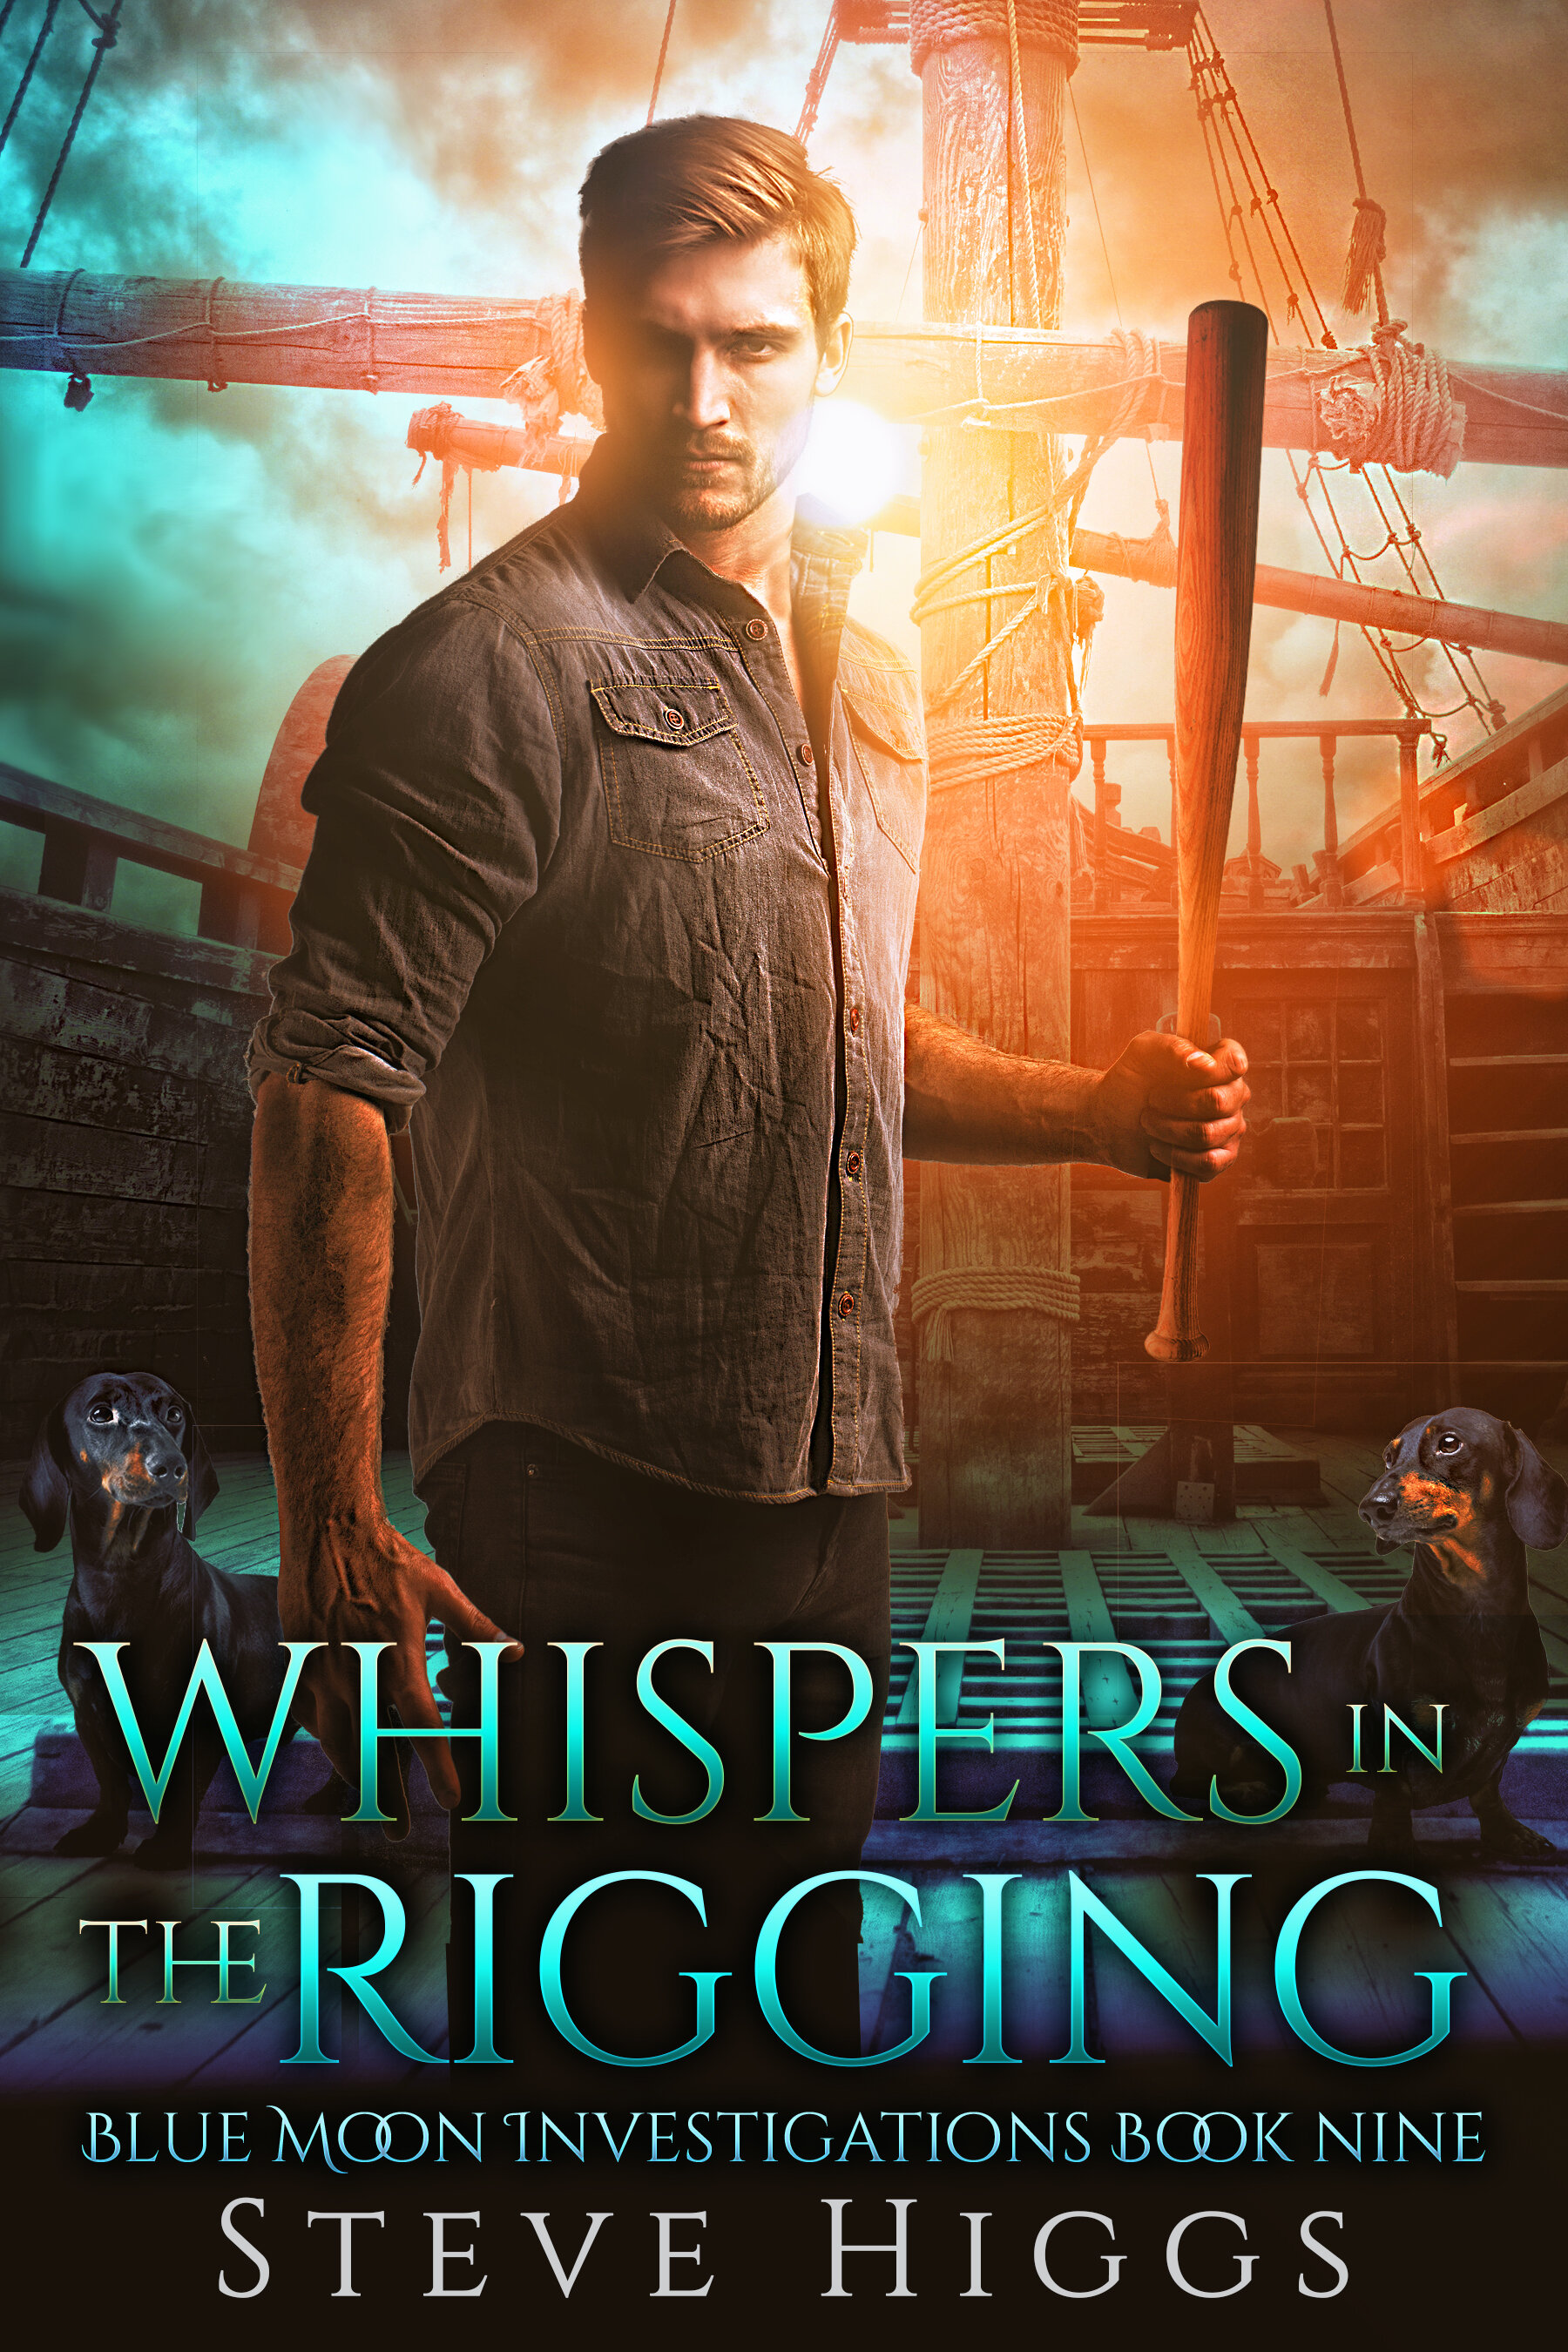 Steve Higgs - Whispers in the Rigging – Blue Moon Investigations Book 2.jpg